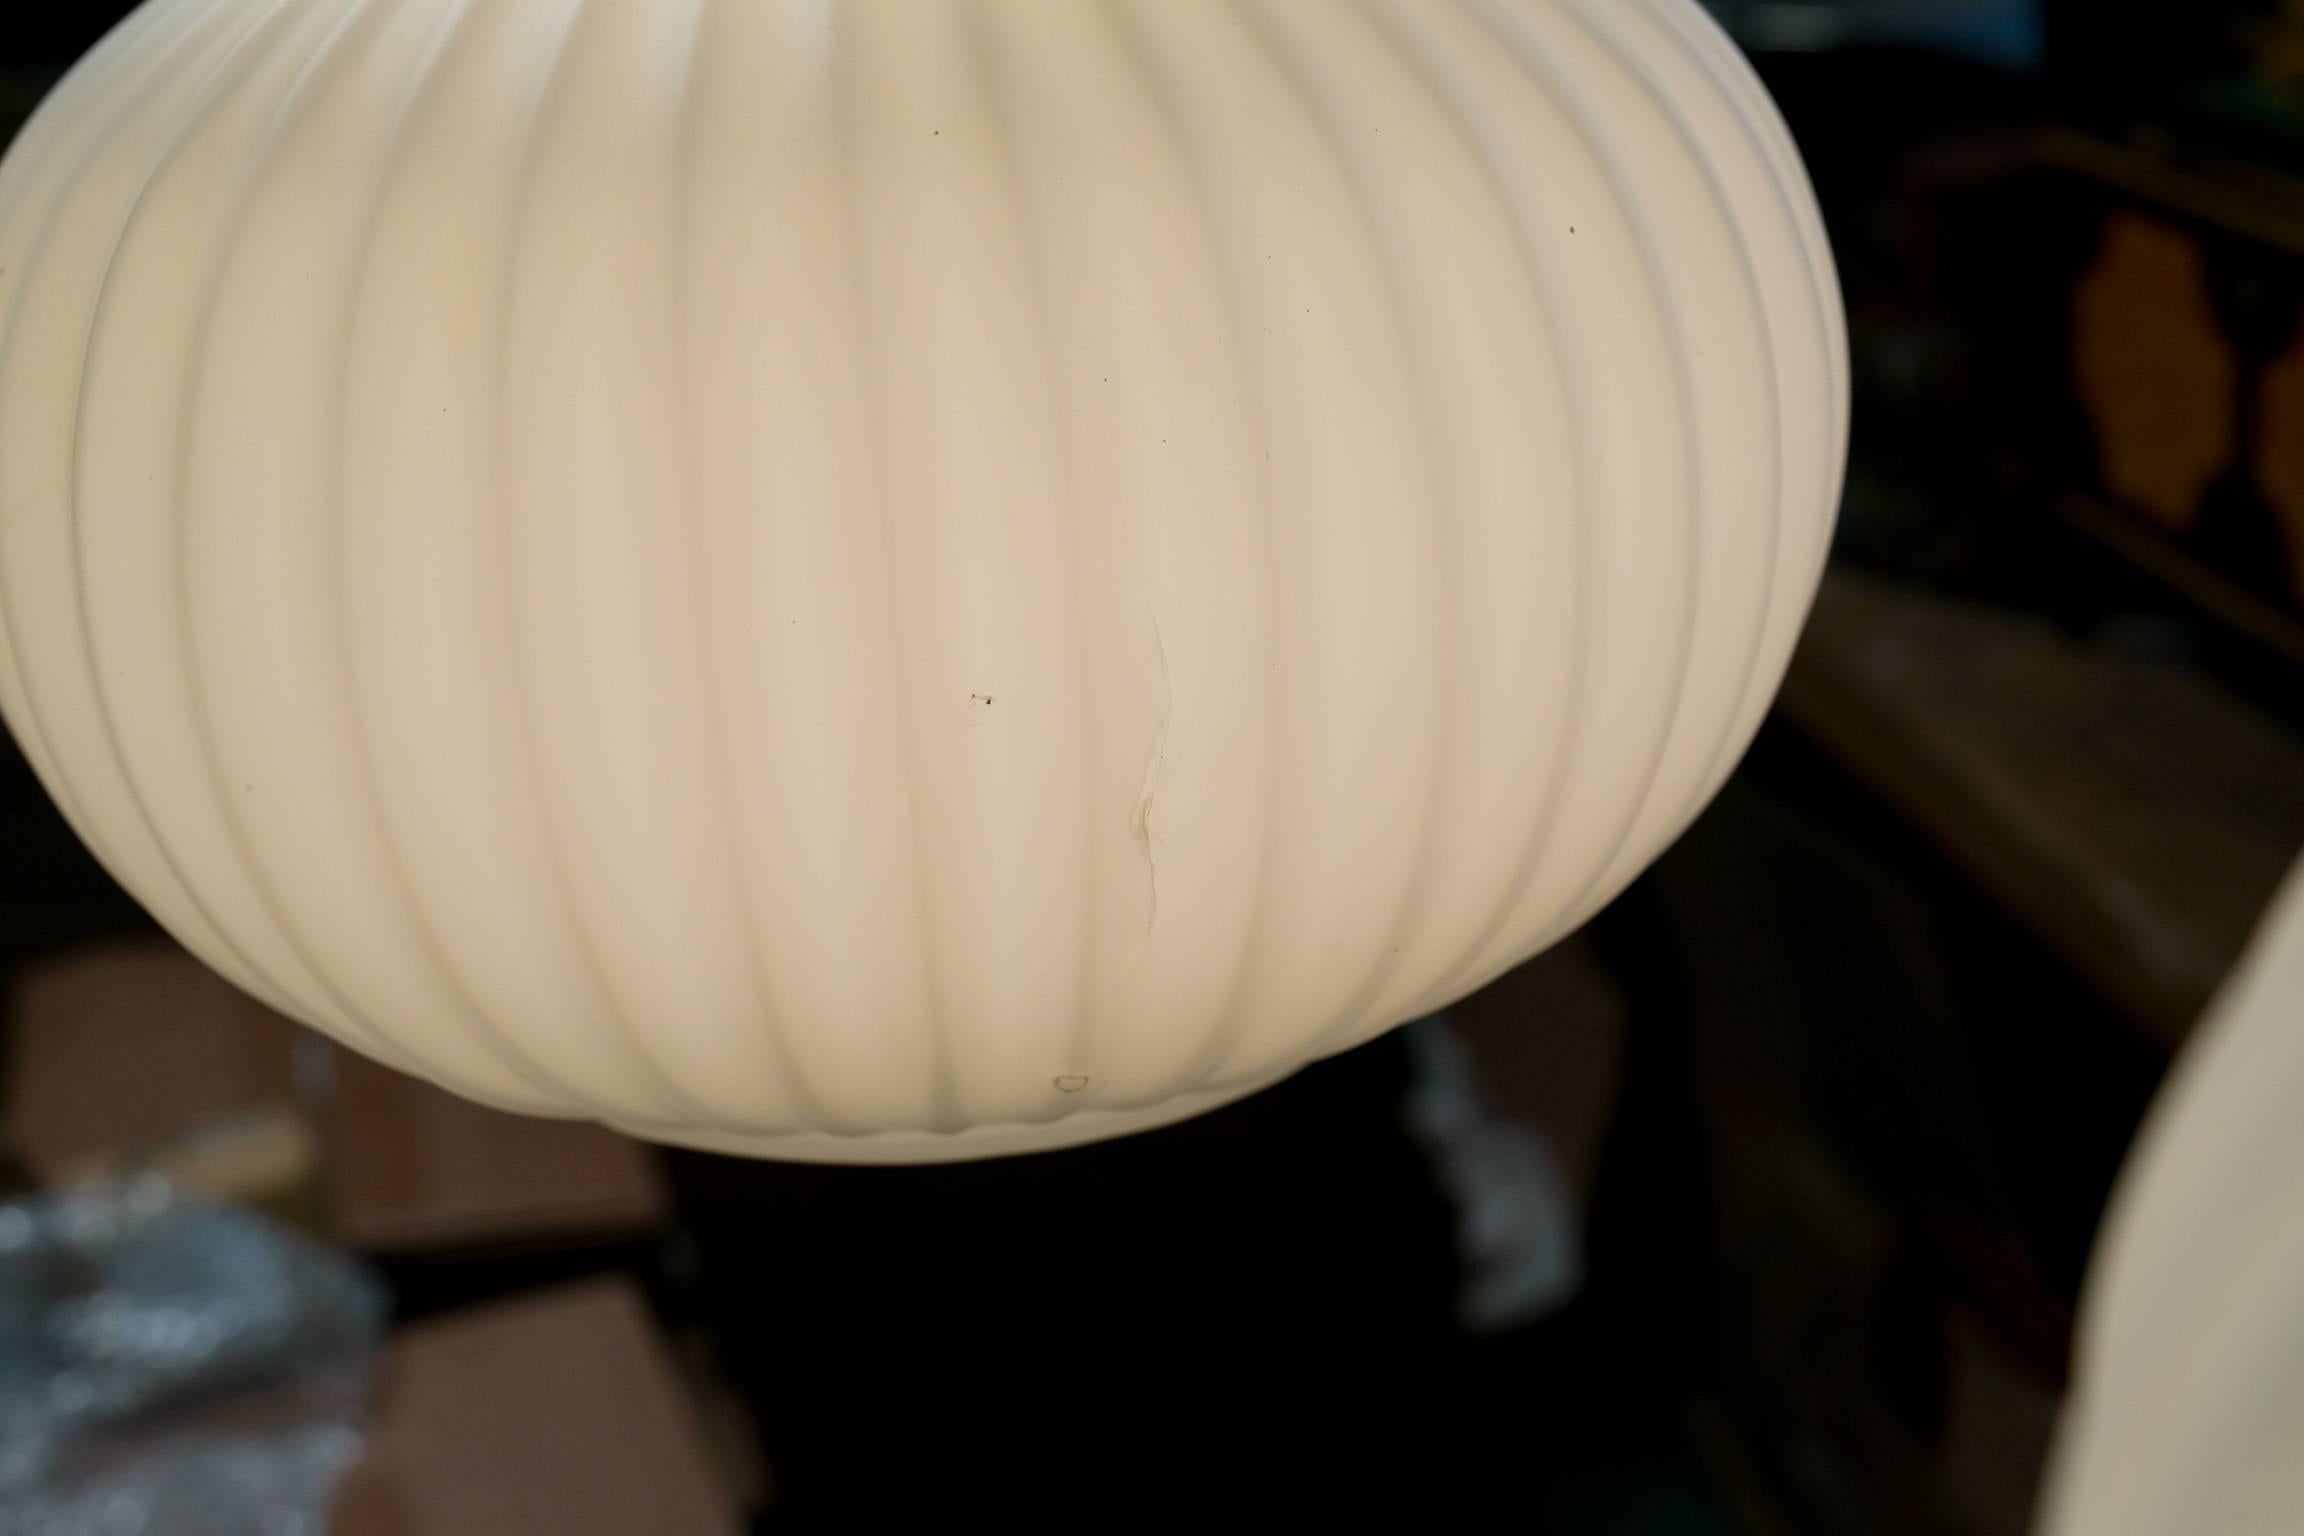 Three blown milk glass shades per light with teakwood and brass collars. Newly wired in the USA with all UL approved parts. Comes with original wood canopy. One globe has a minor crack on the inward facing side, as shown in second photo. Price is